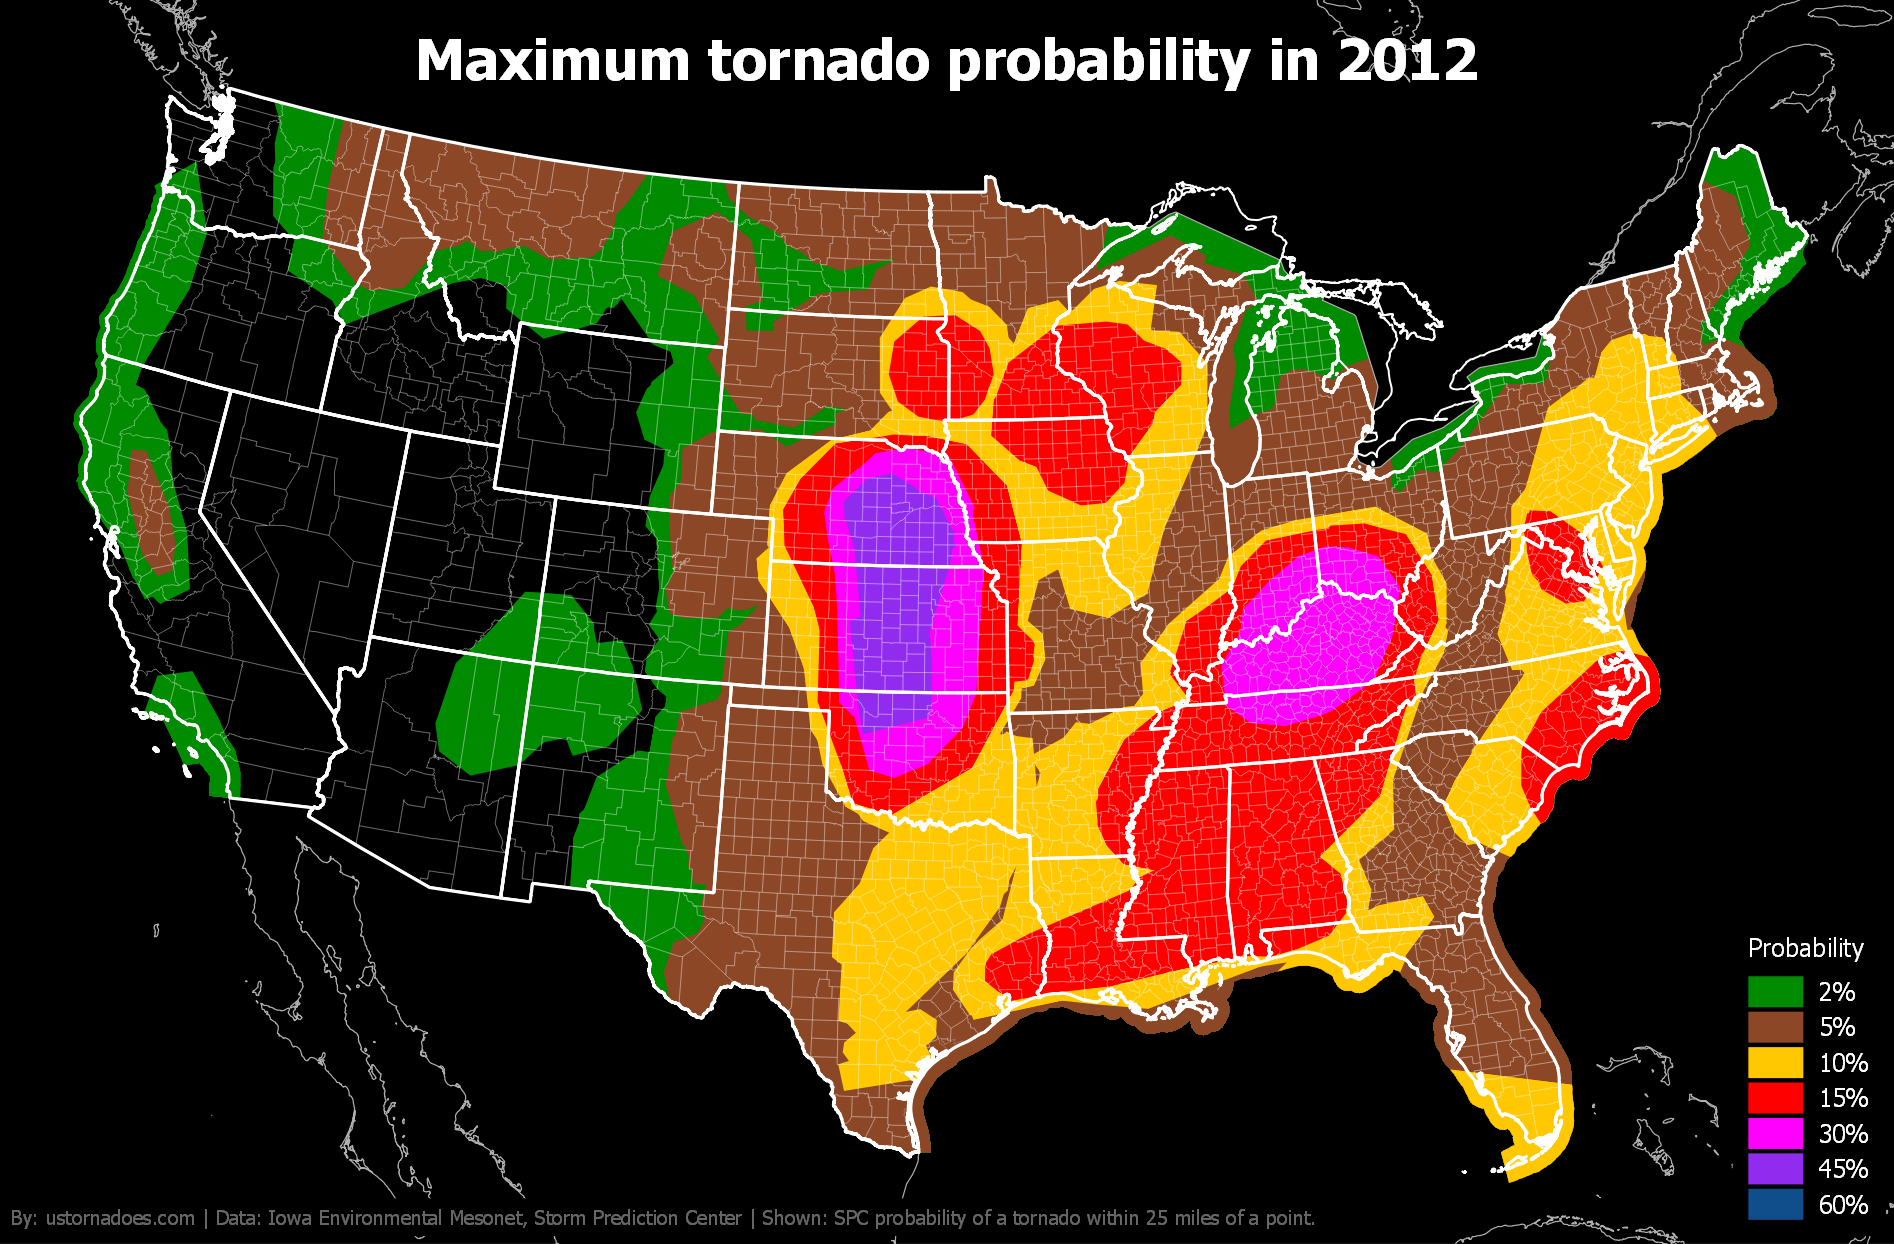 Maximum tornado probabilities by month and year - ustornadoes.com